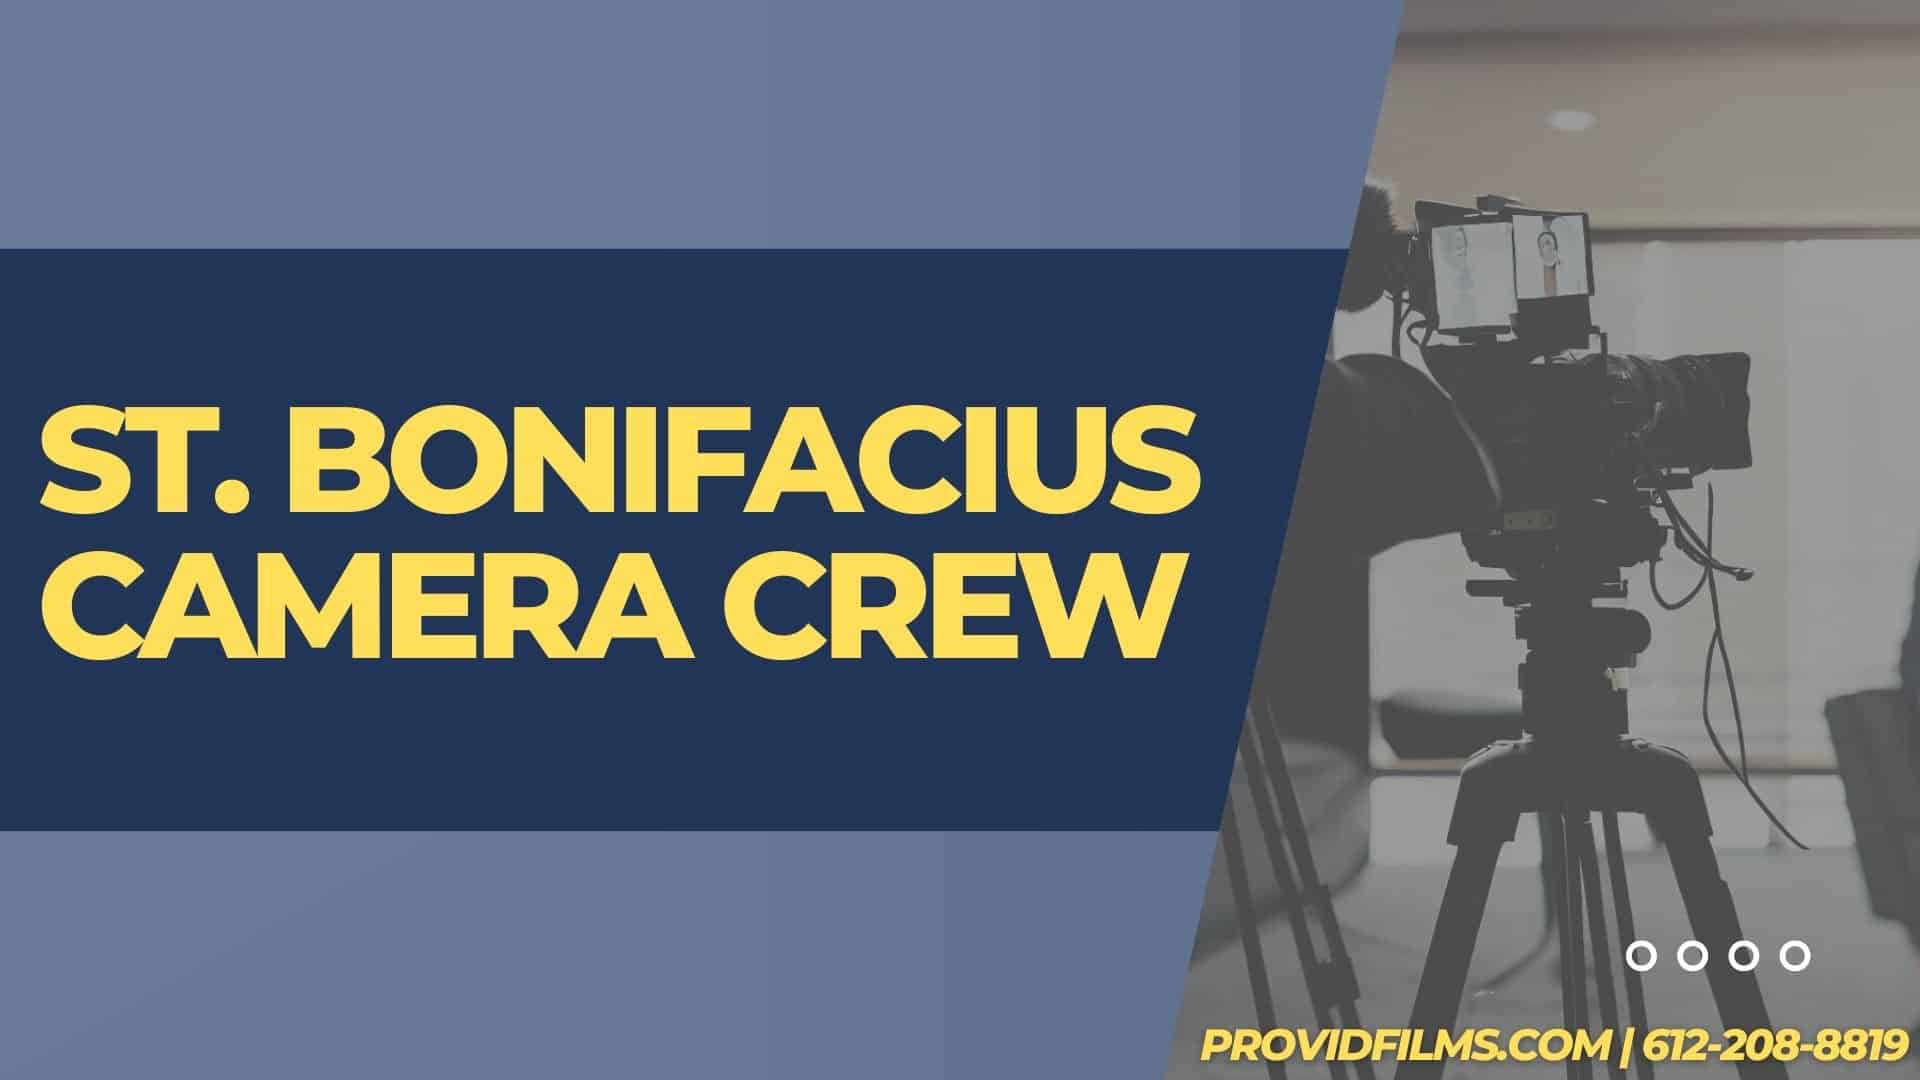 Graphic of a video camera with the text saying "St. Bonifacius Camera Crew"